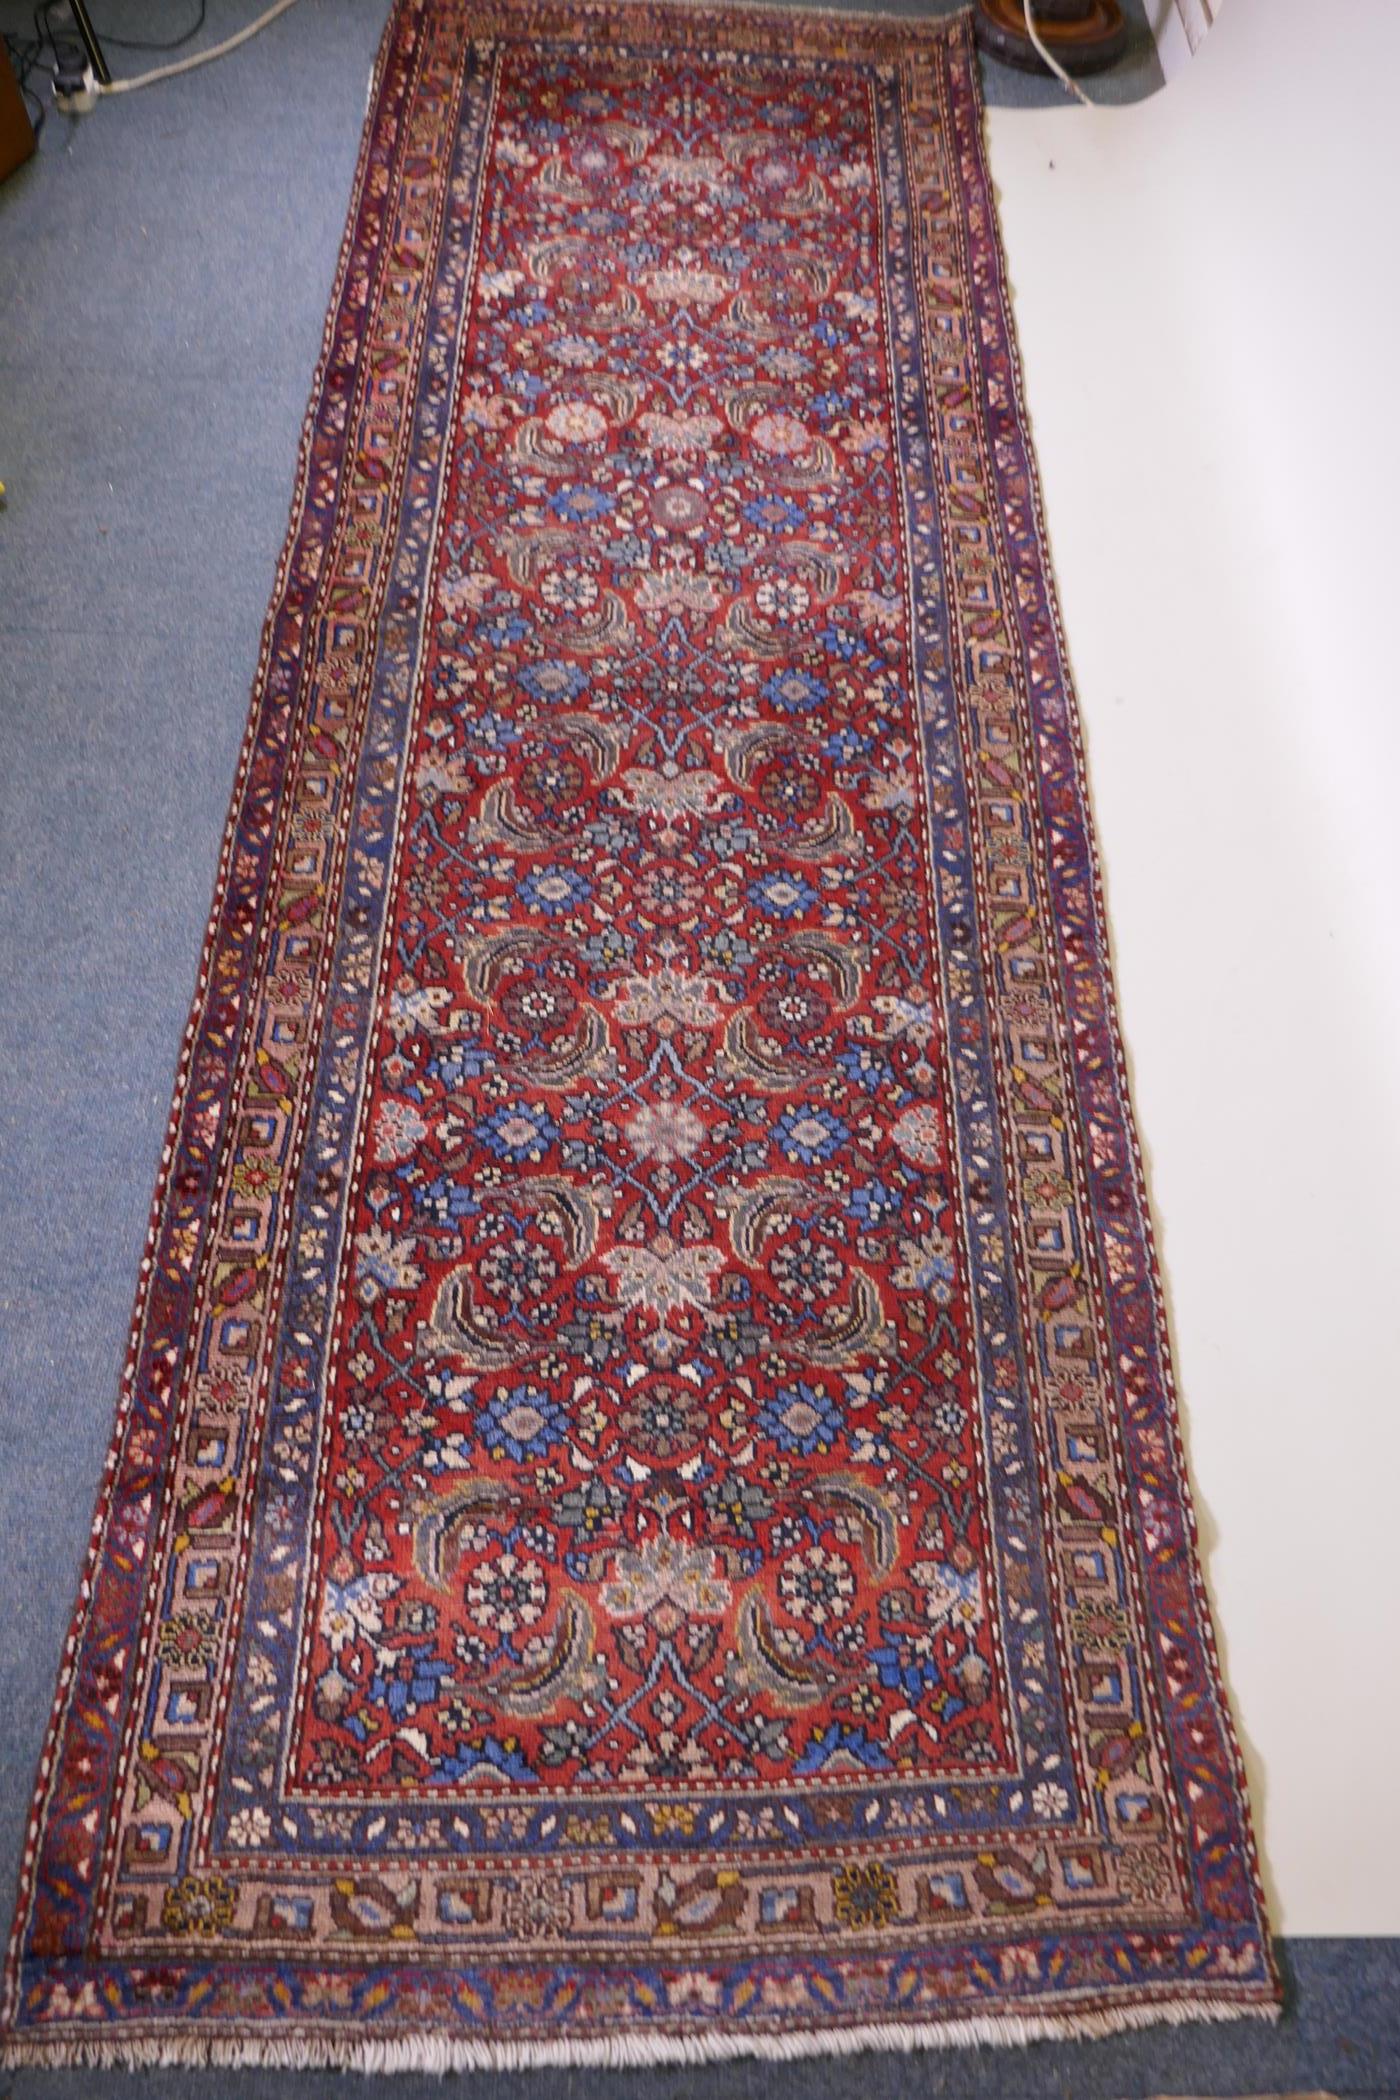 A hand woven red ground Persian Hamadan nomadic runner with an allover floral design, 102 x 310cm - Image 3 of 6